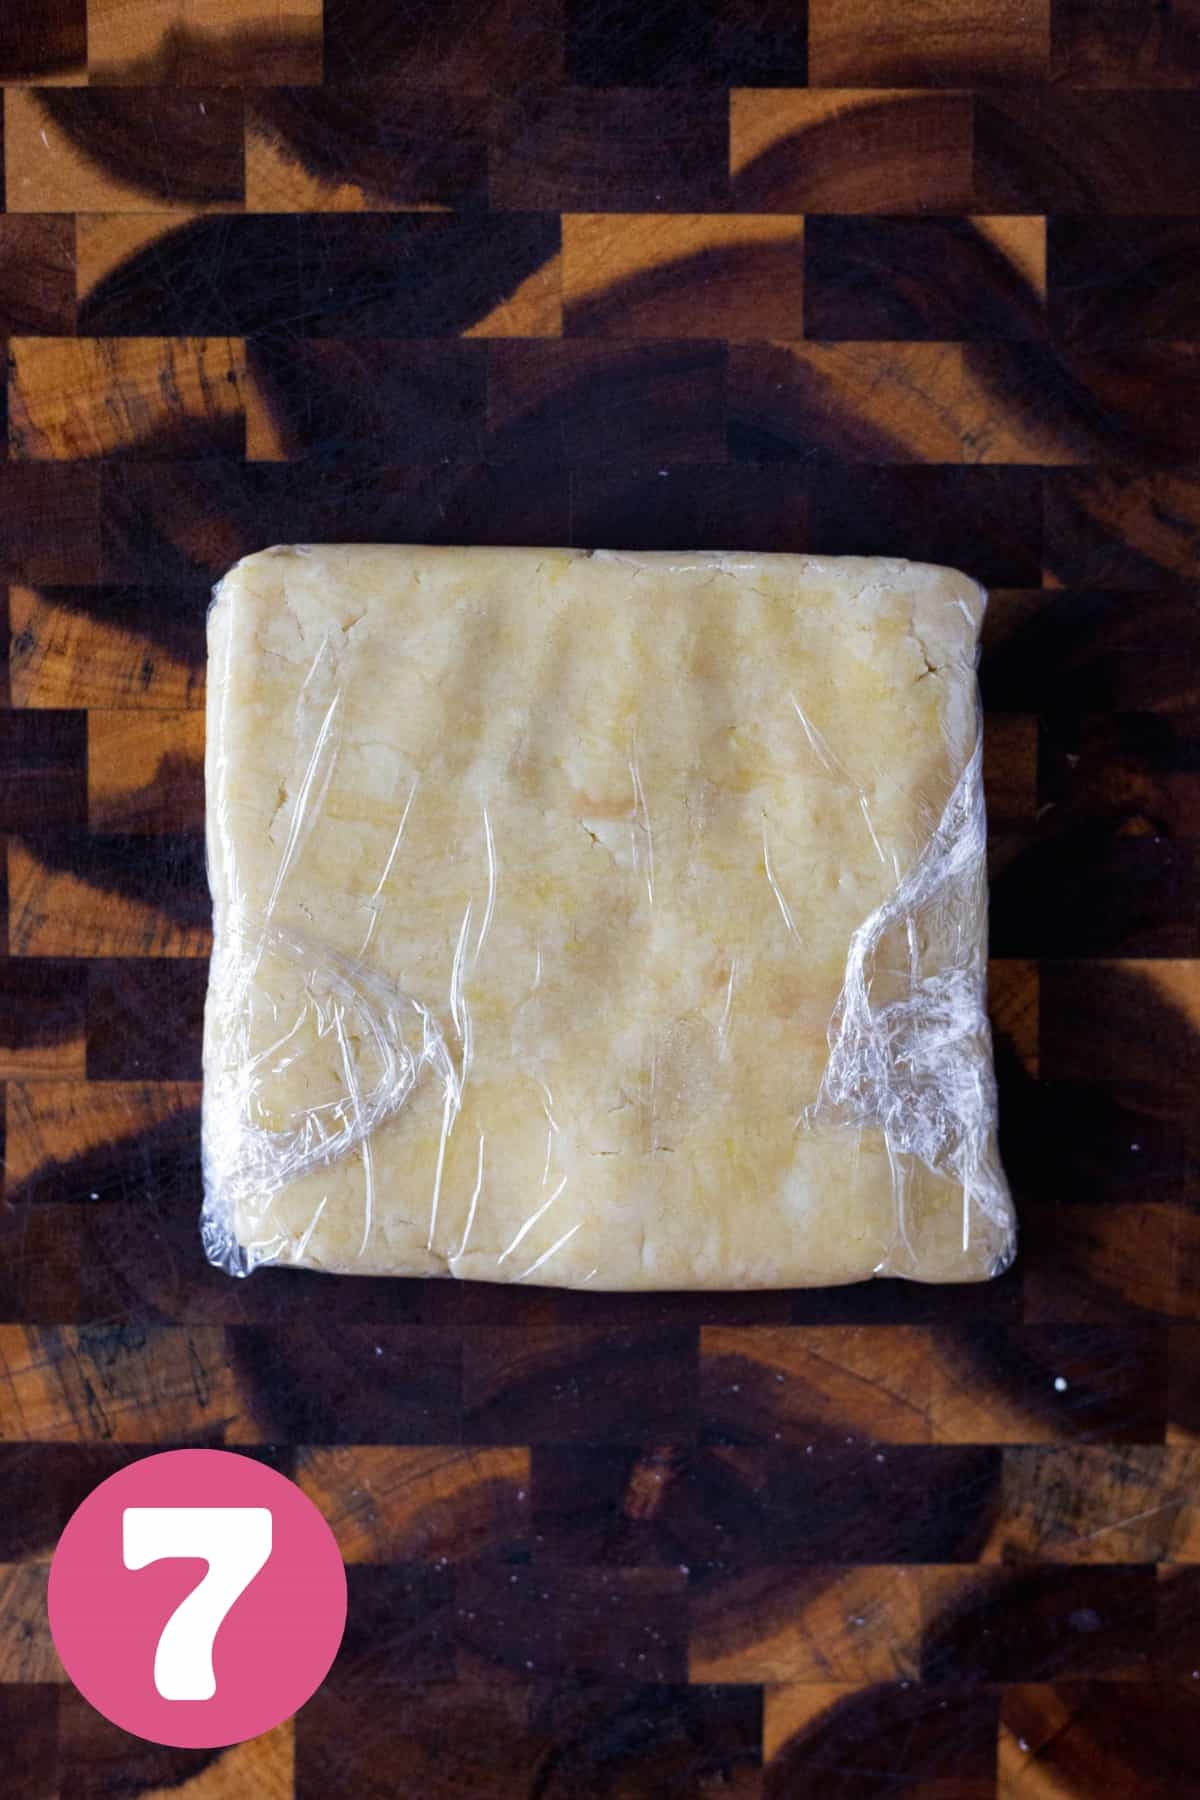 Apple tart dough in a square shape wrapped in plastic wrap